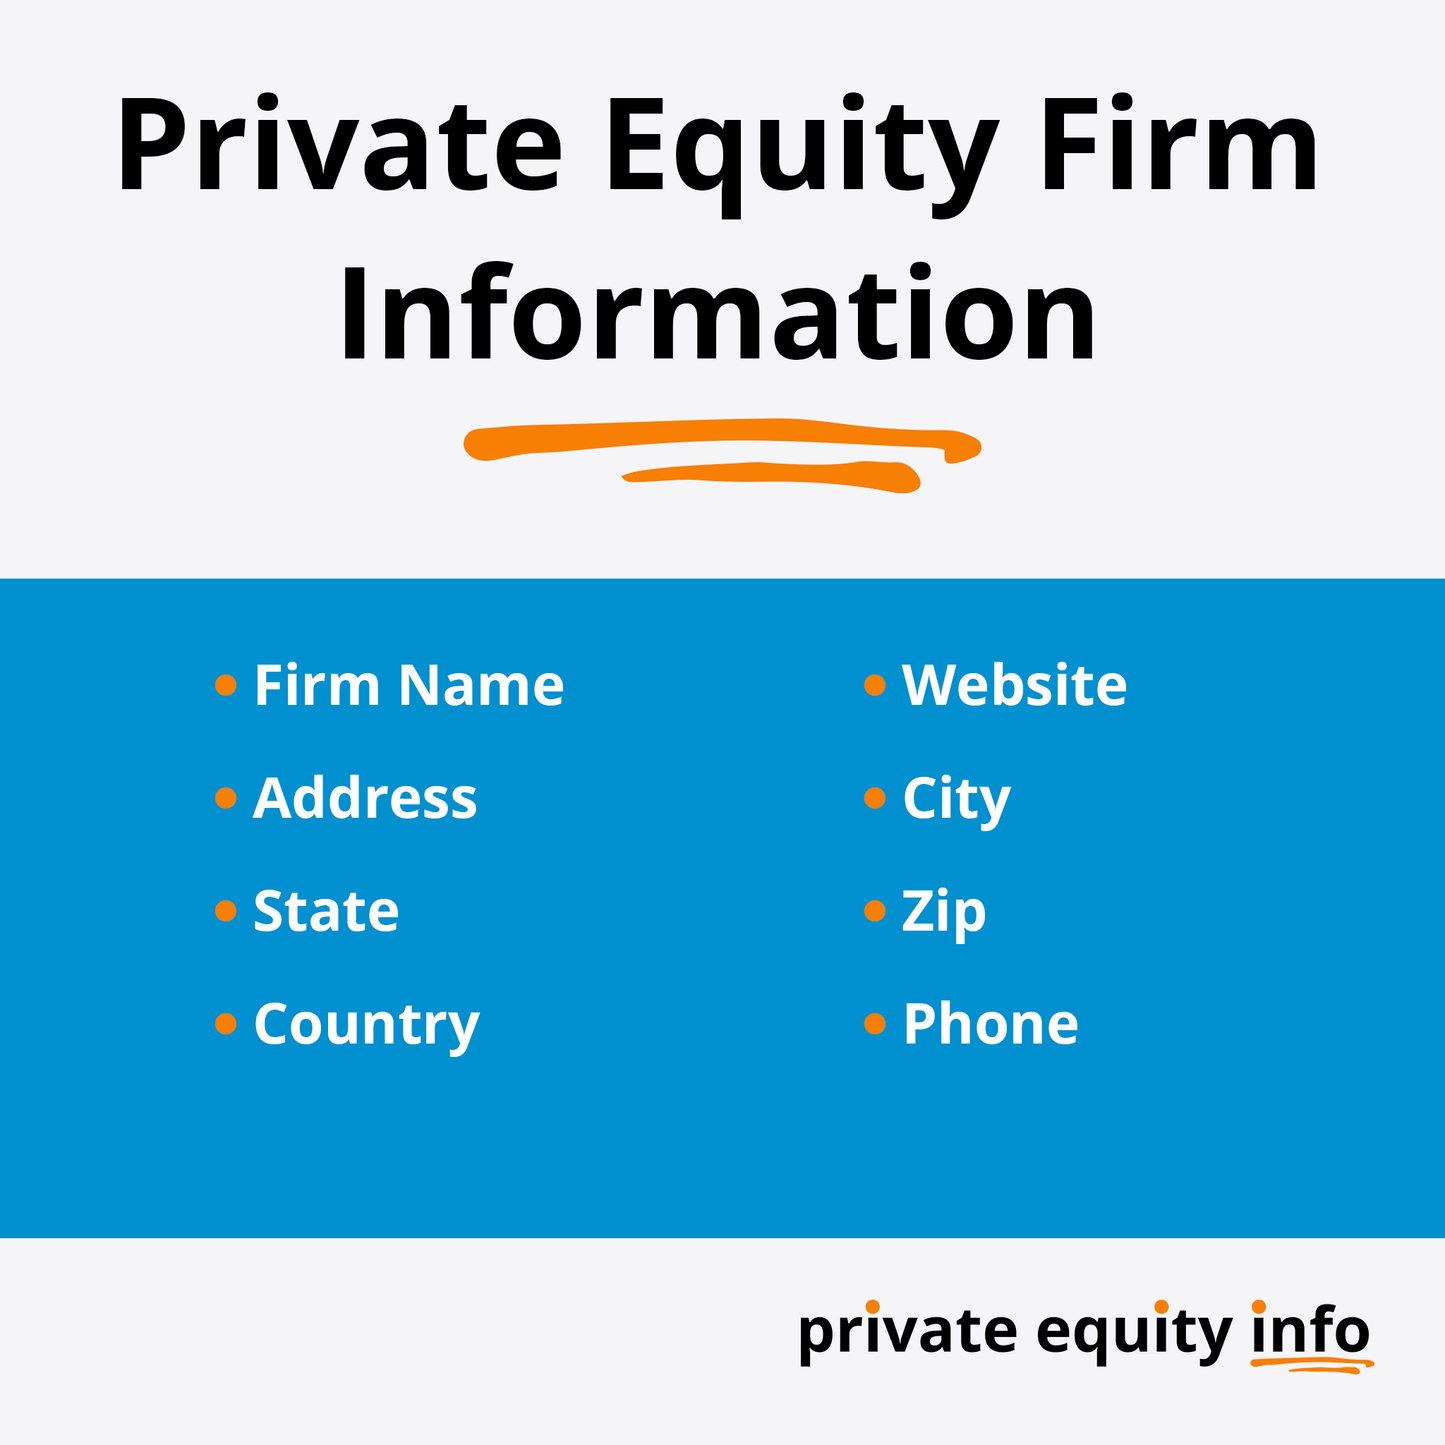 Private Equity Firms in California and Nevada